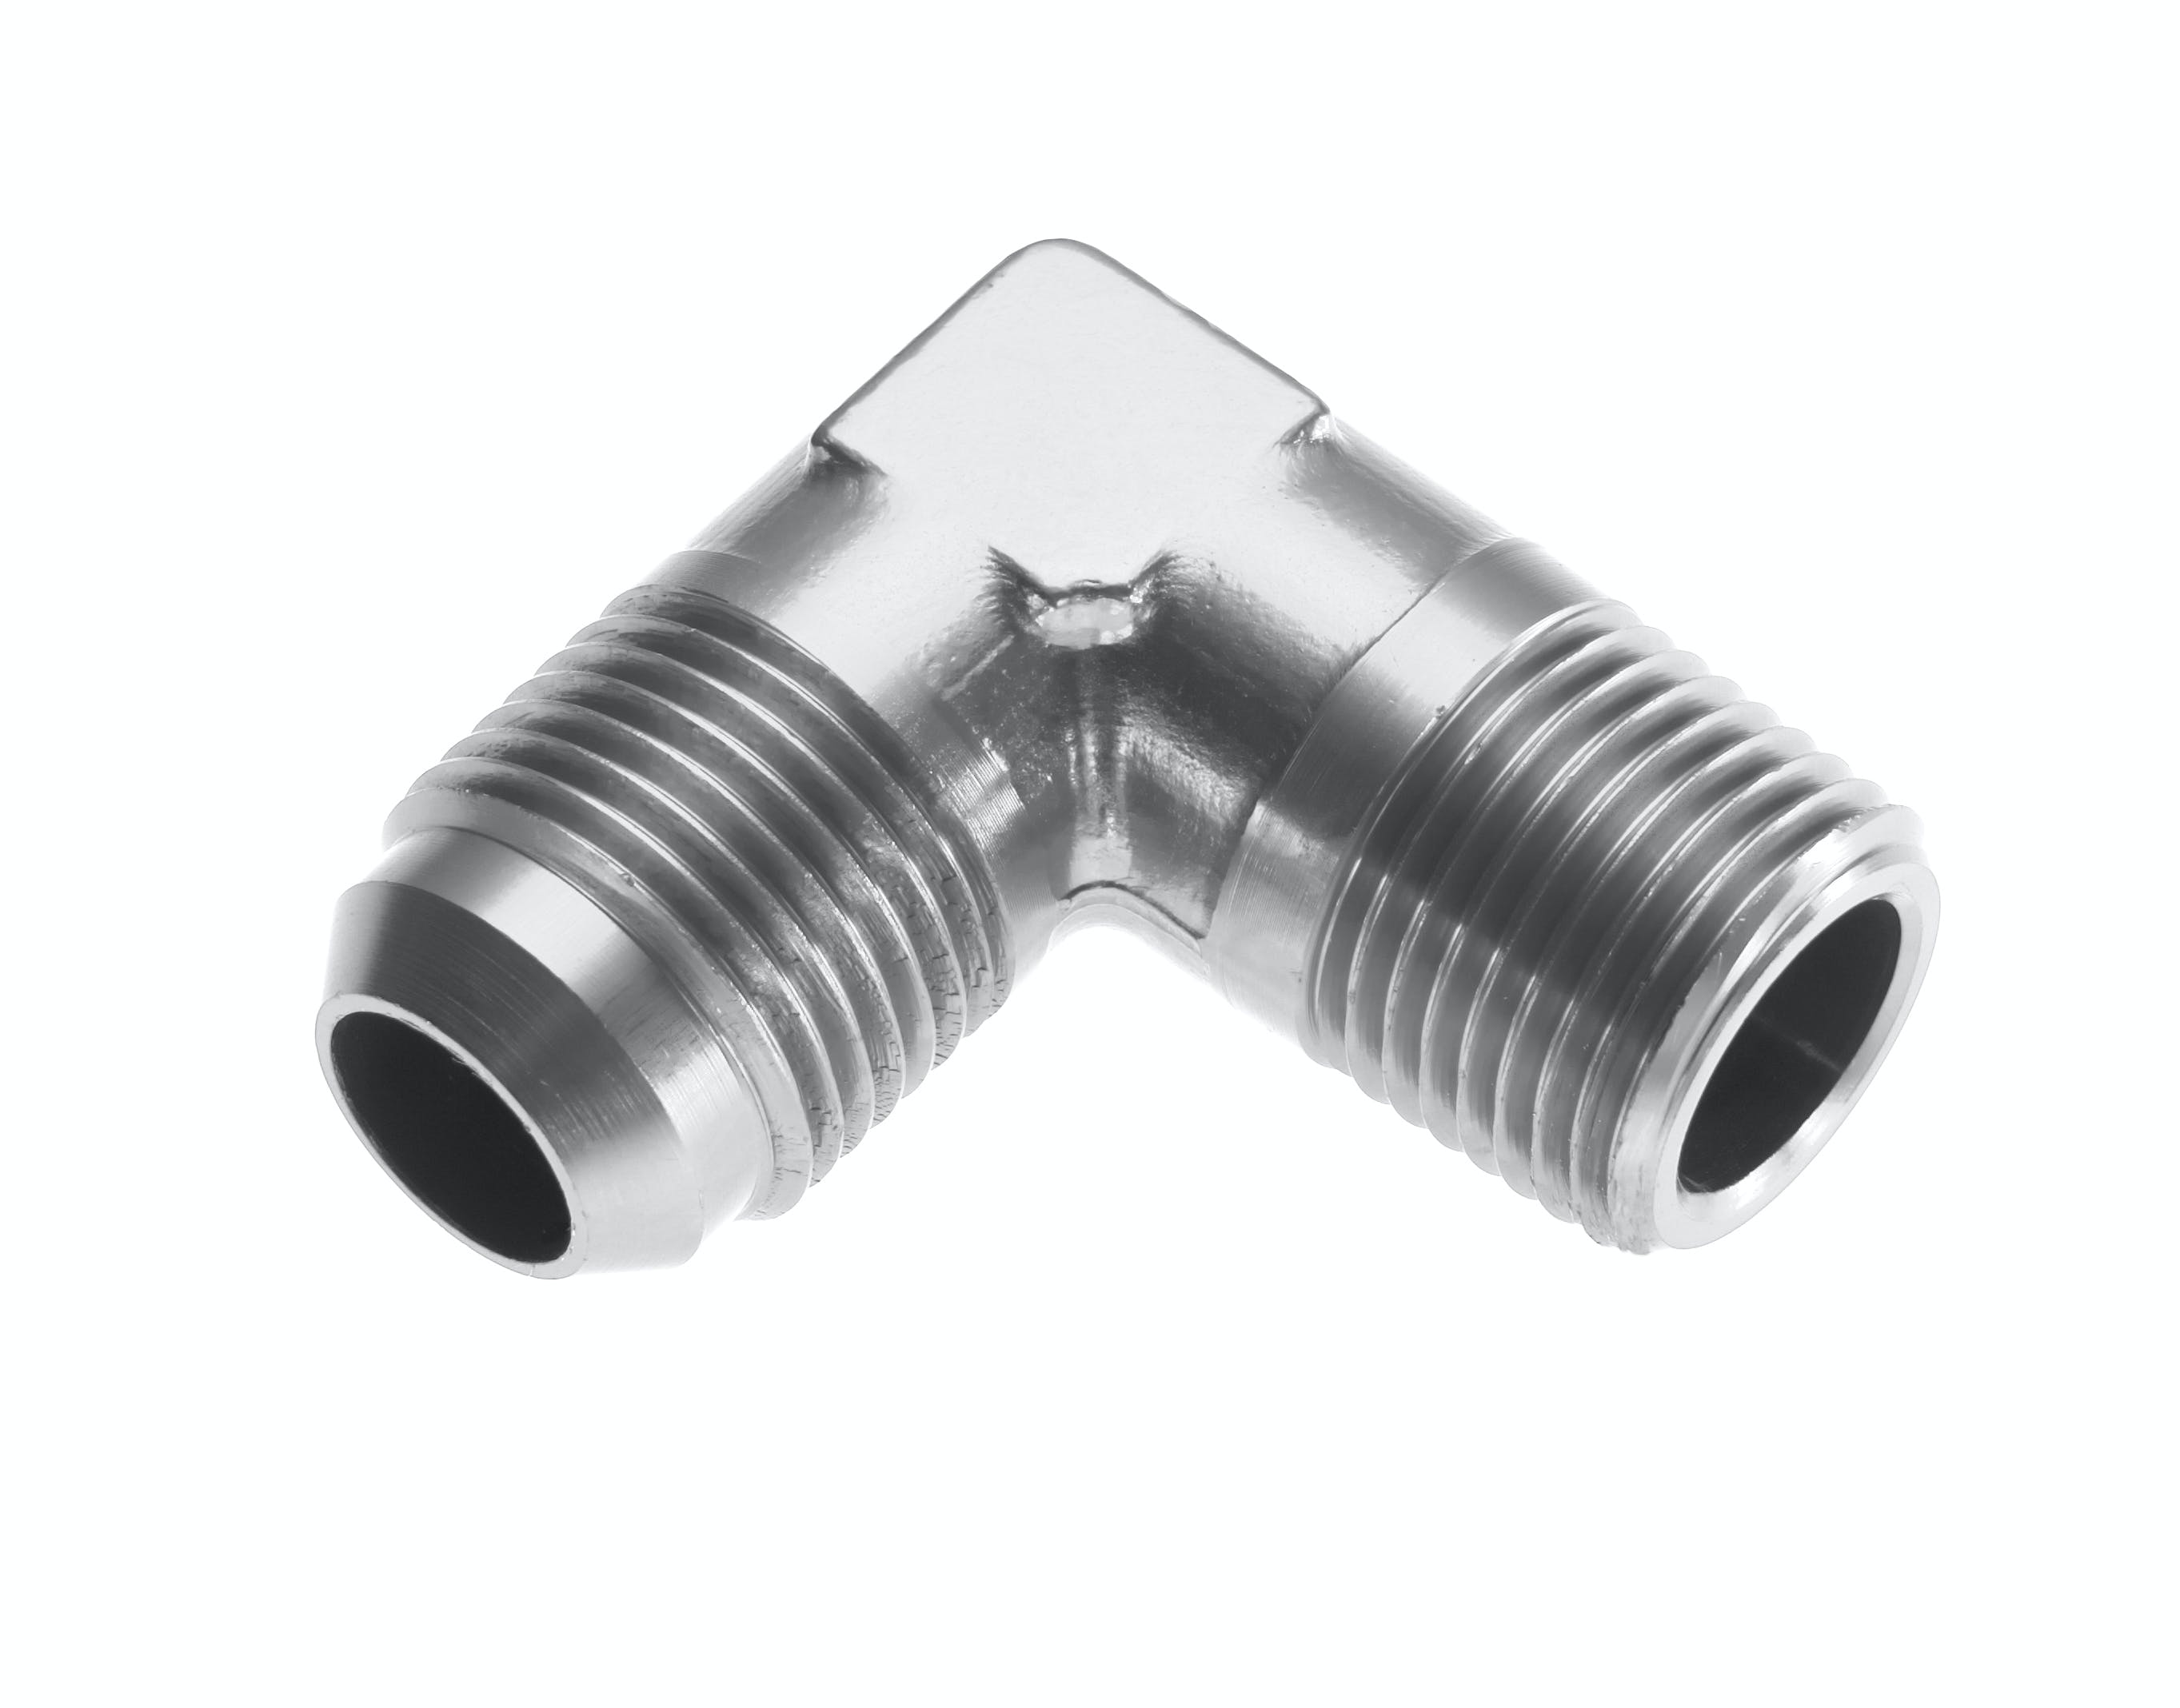 Redhorse Performance 822-08-08-5 -08 90 degree Male adapter to -08 (1/2in) NPT Male - clear